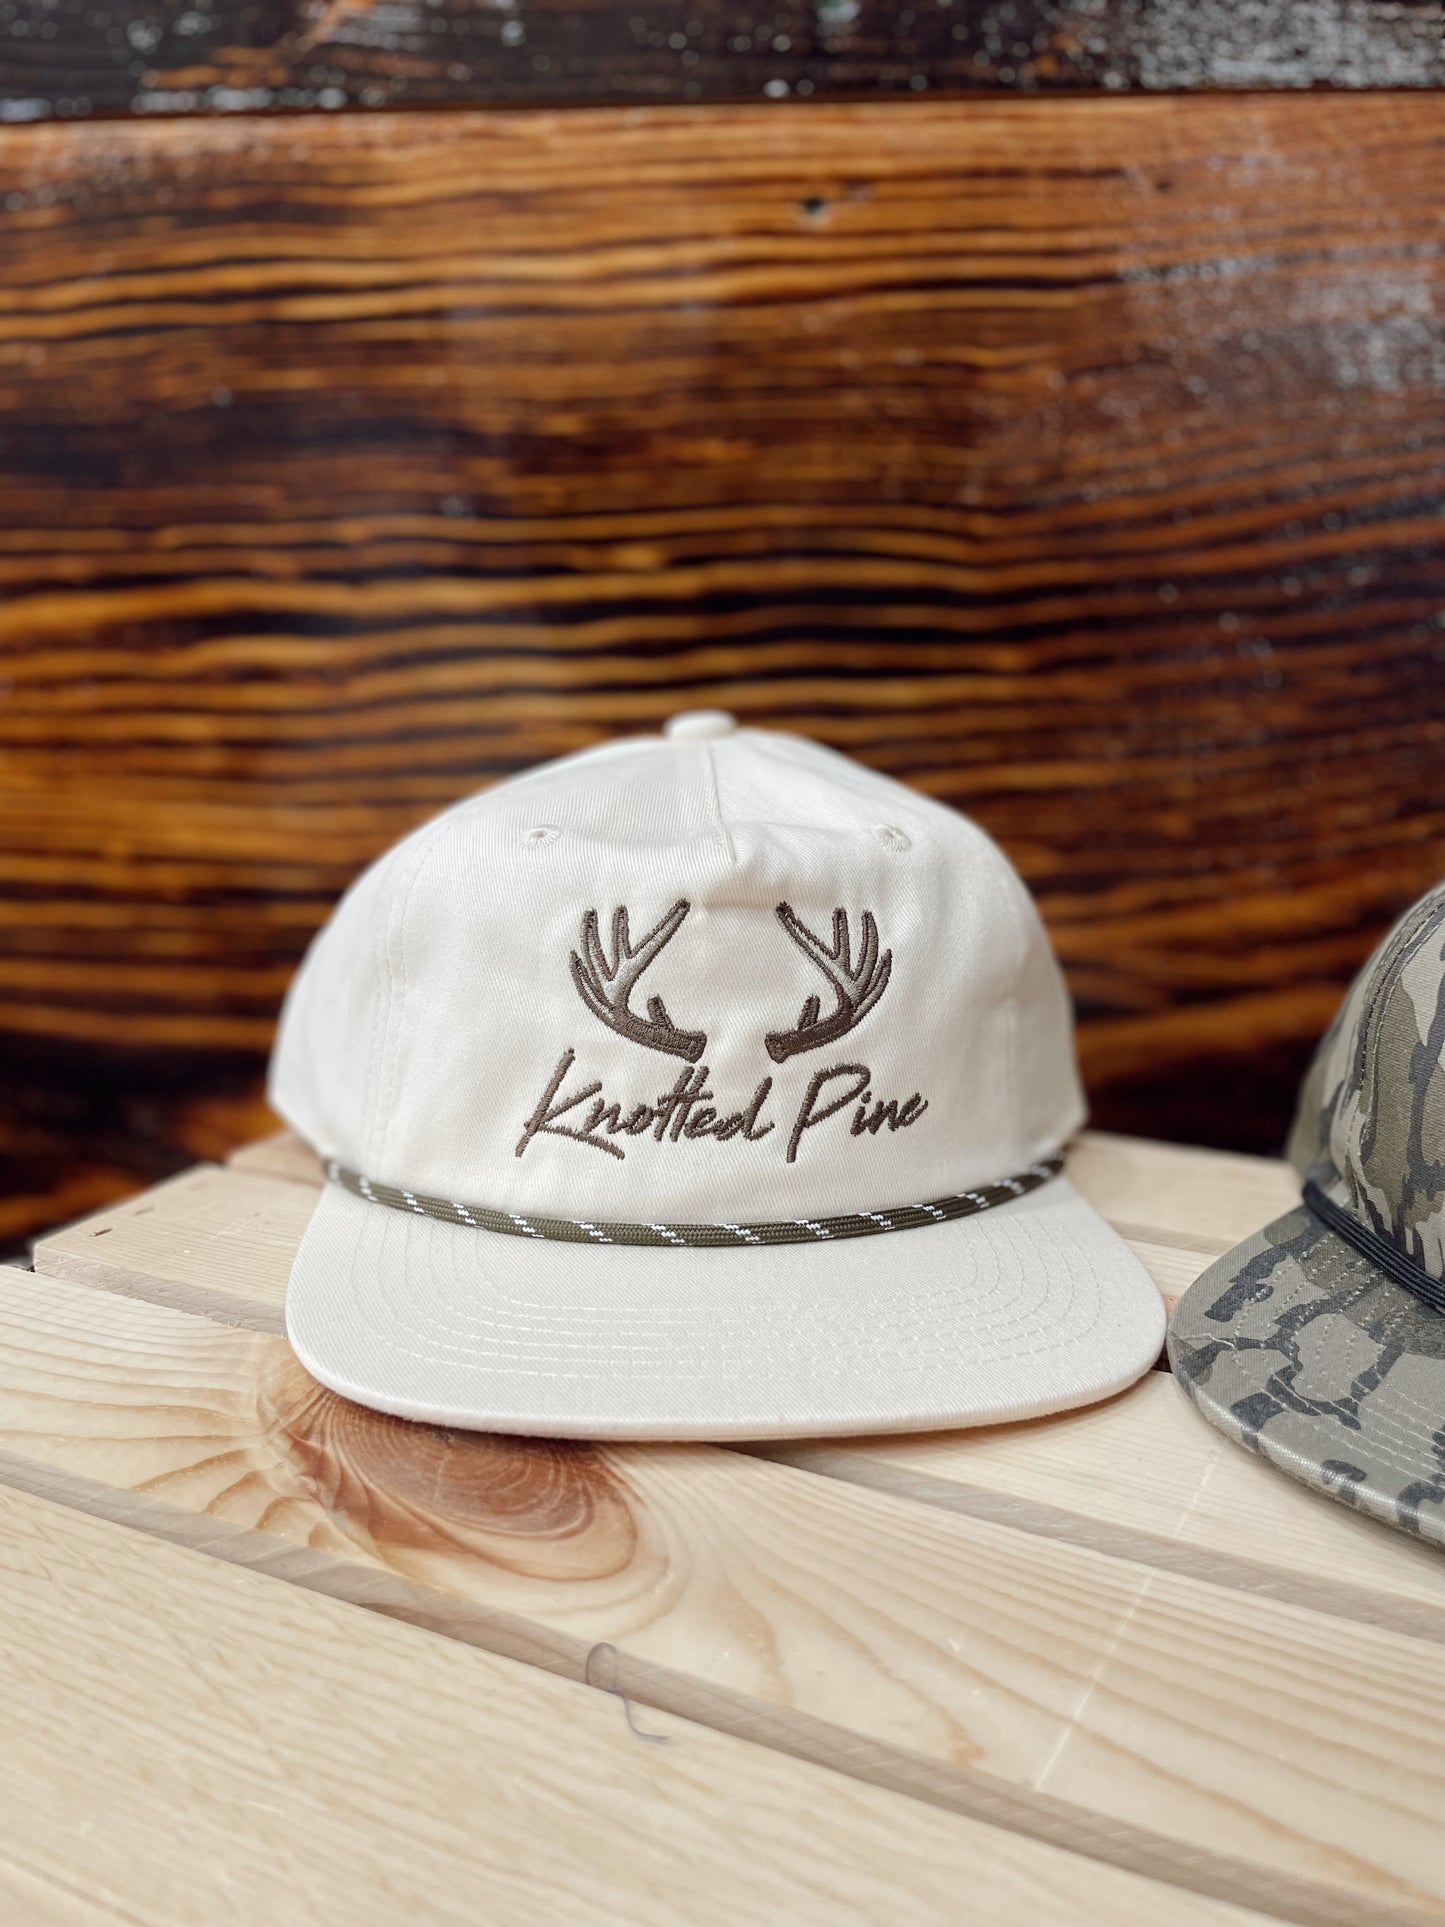 KNOTTED PINE Hats